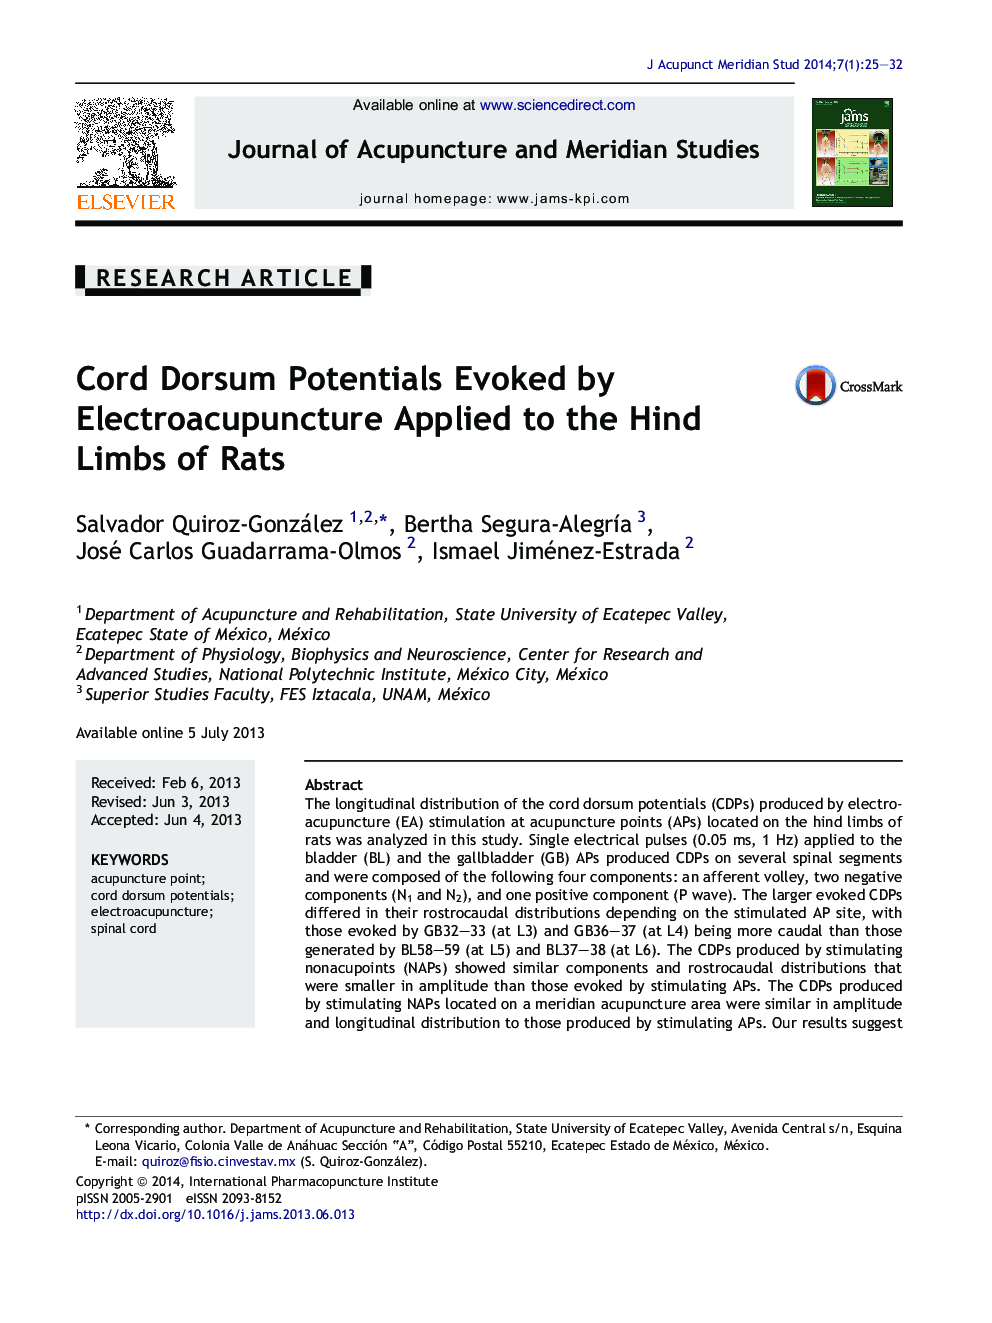 Cord Dorsum Potentials Evoked by Electroacupuncture Applied to the Hind Limbs of Rats